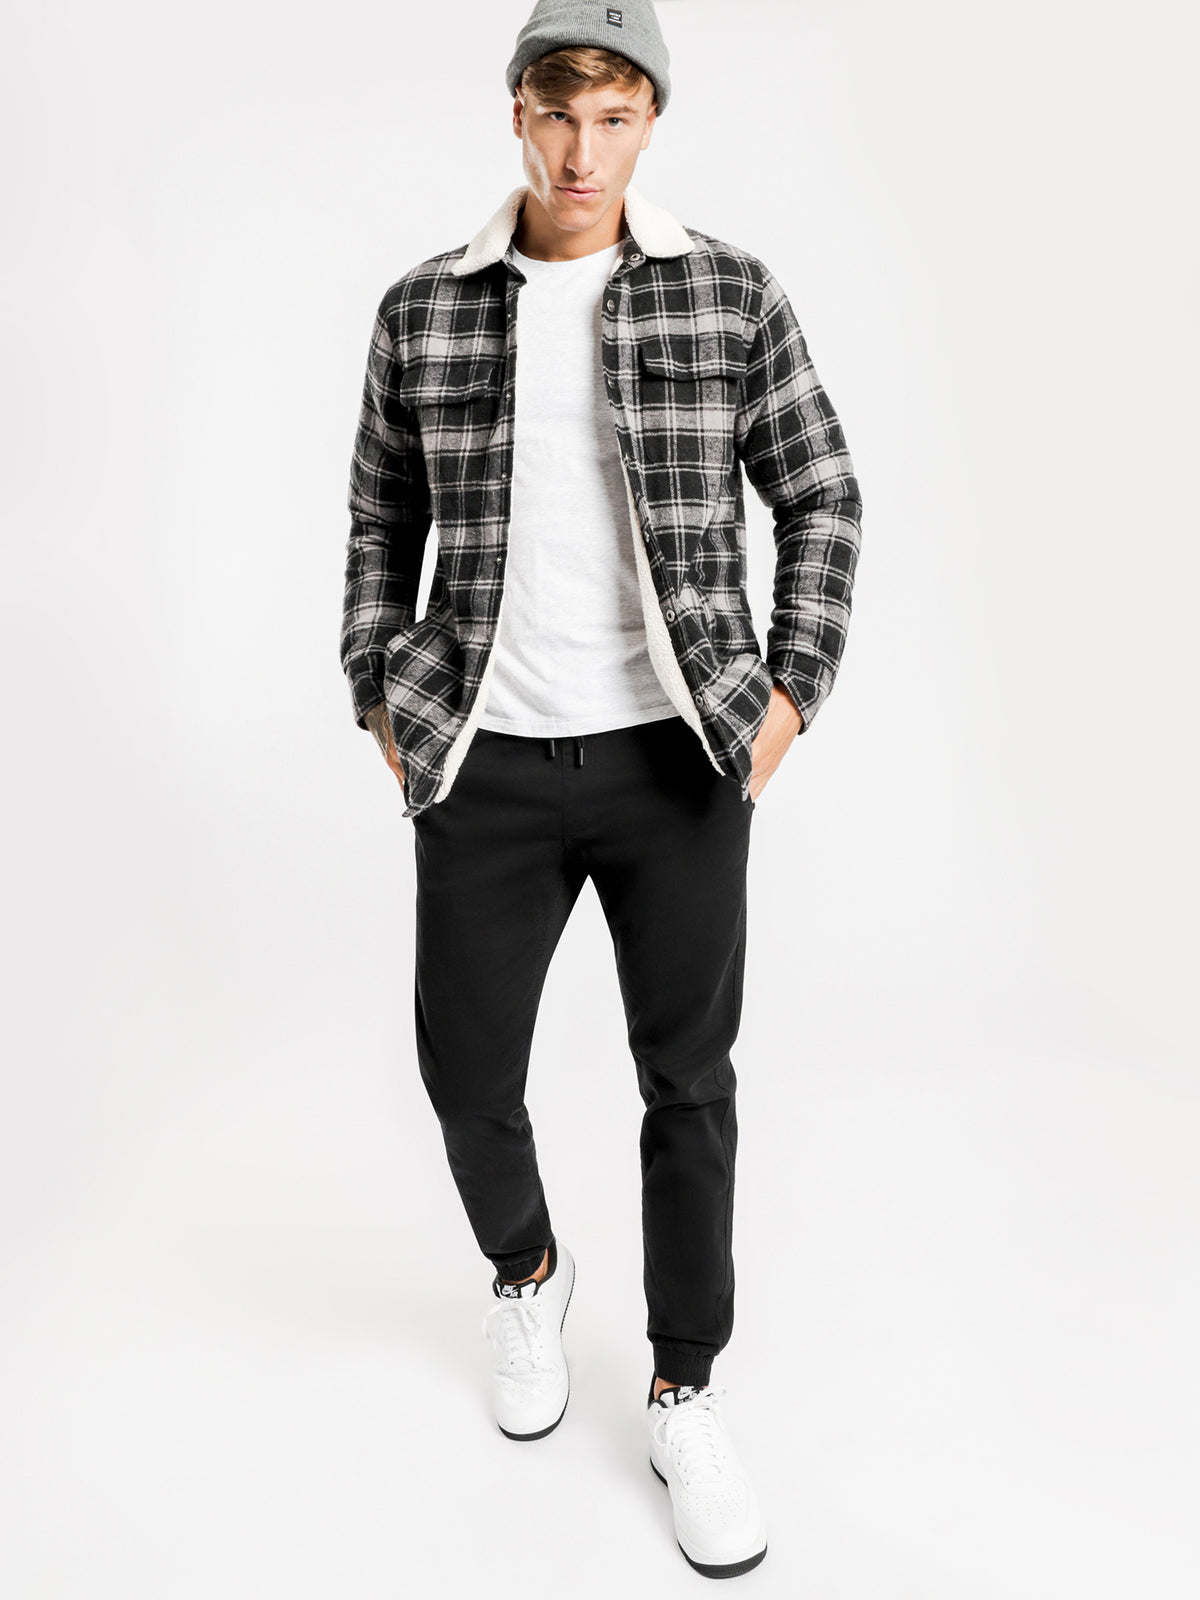 Knox Plaid Sherpa Jacket in Charcoal